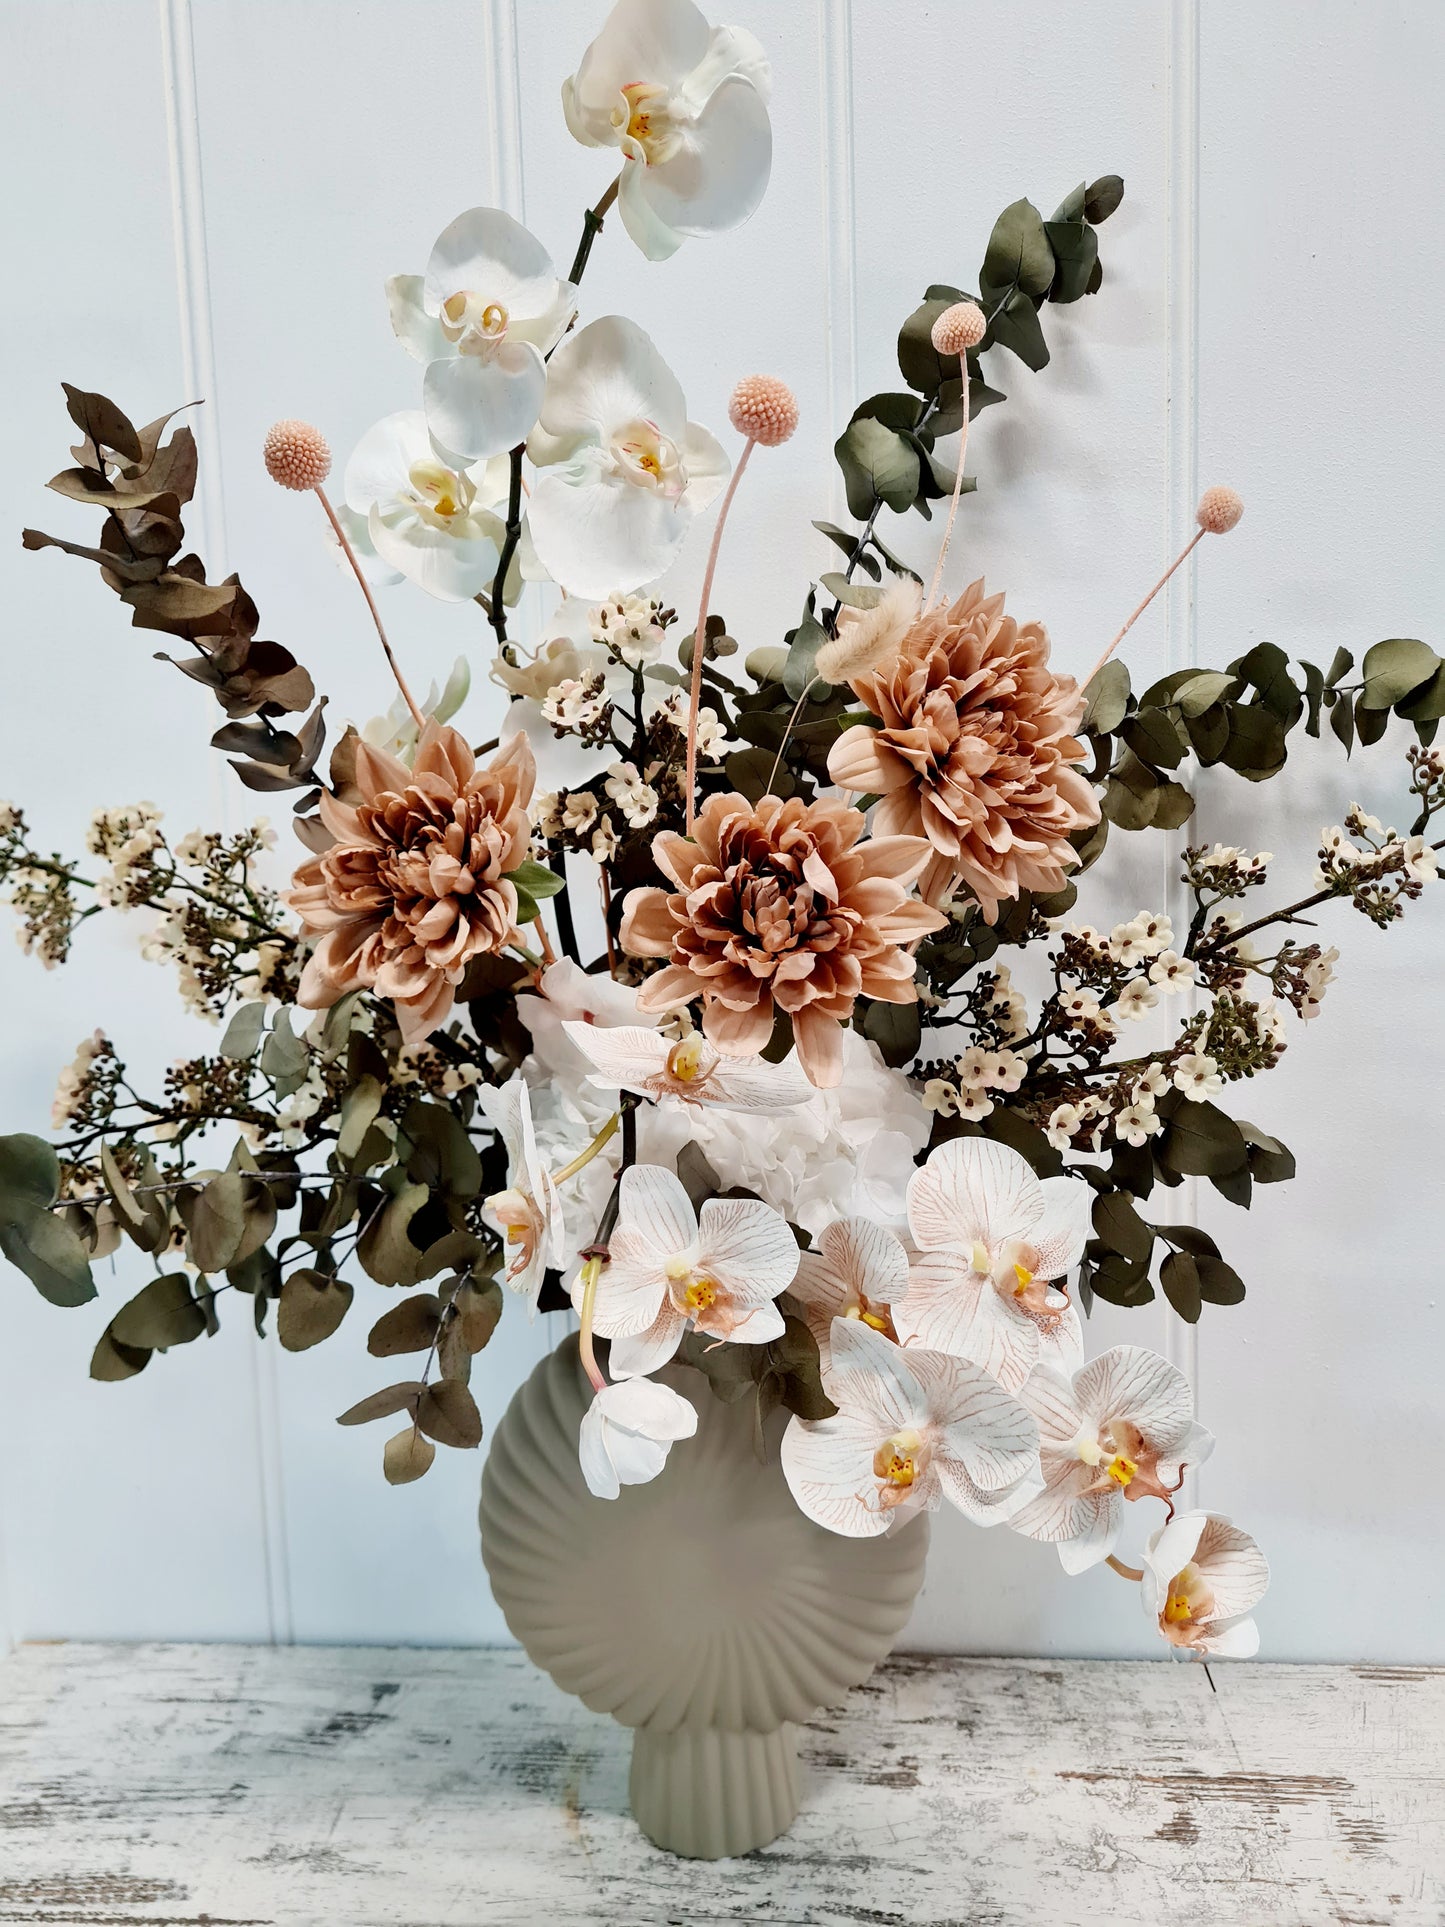 Featuring premium artificial Phalaenopsis orchids, blossoms, and dahlias, complemented by preserved eucalyptus gum foliage and hydrangeas.